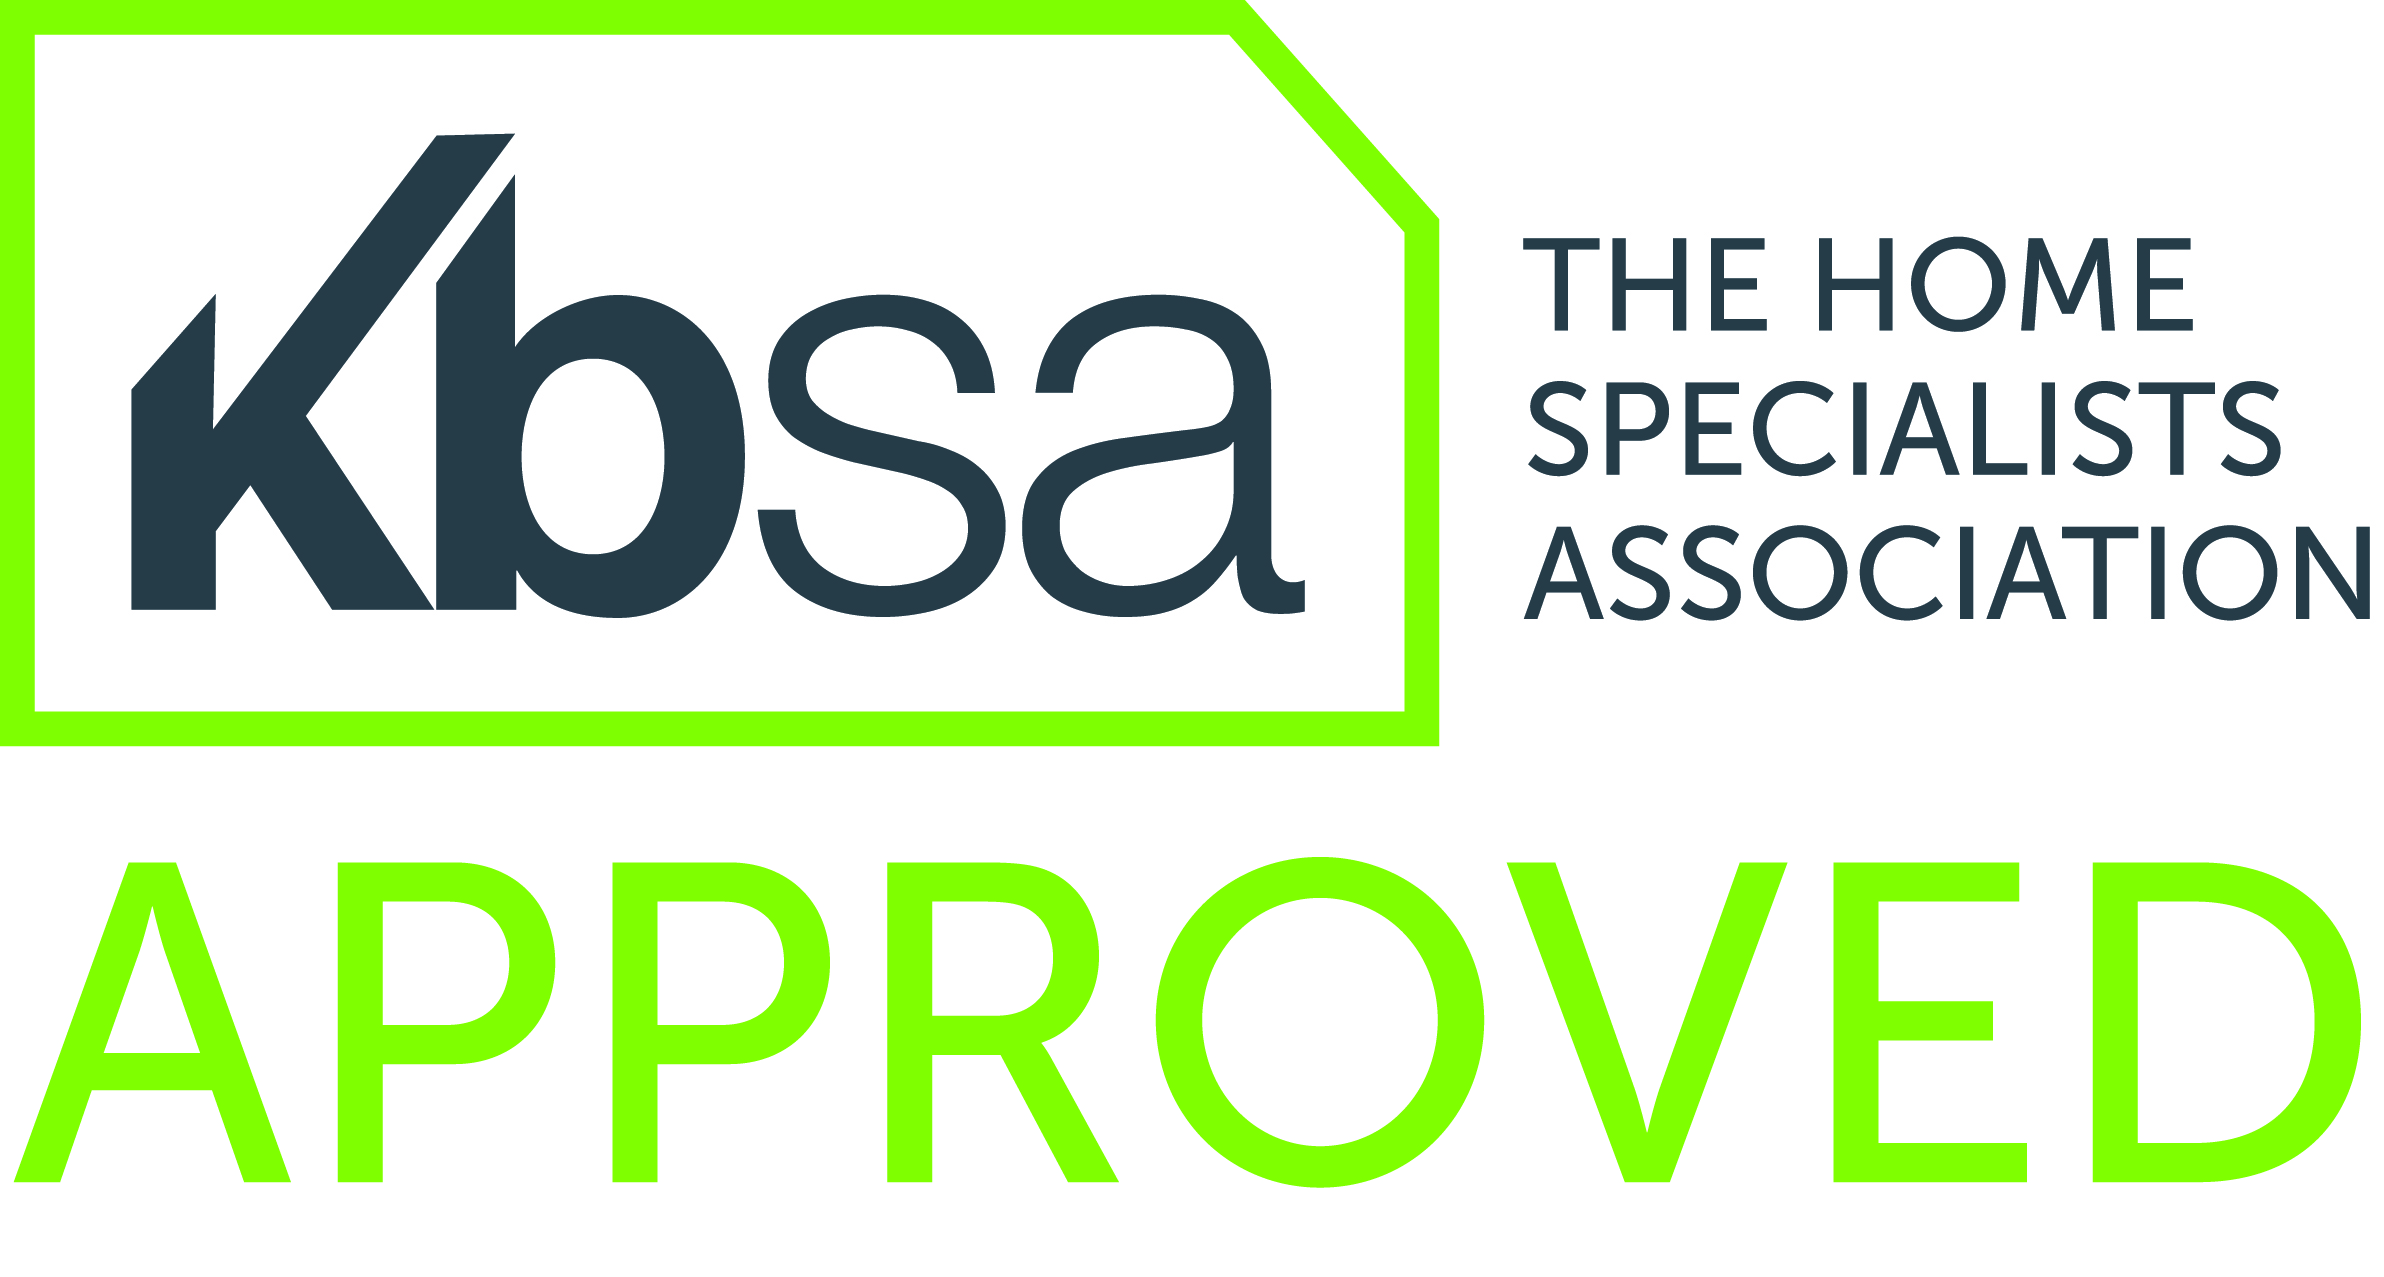 The Home Specialists Association